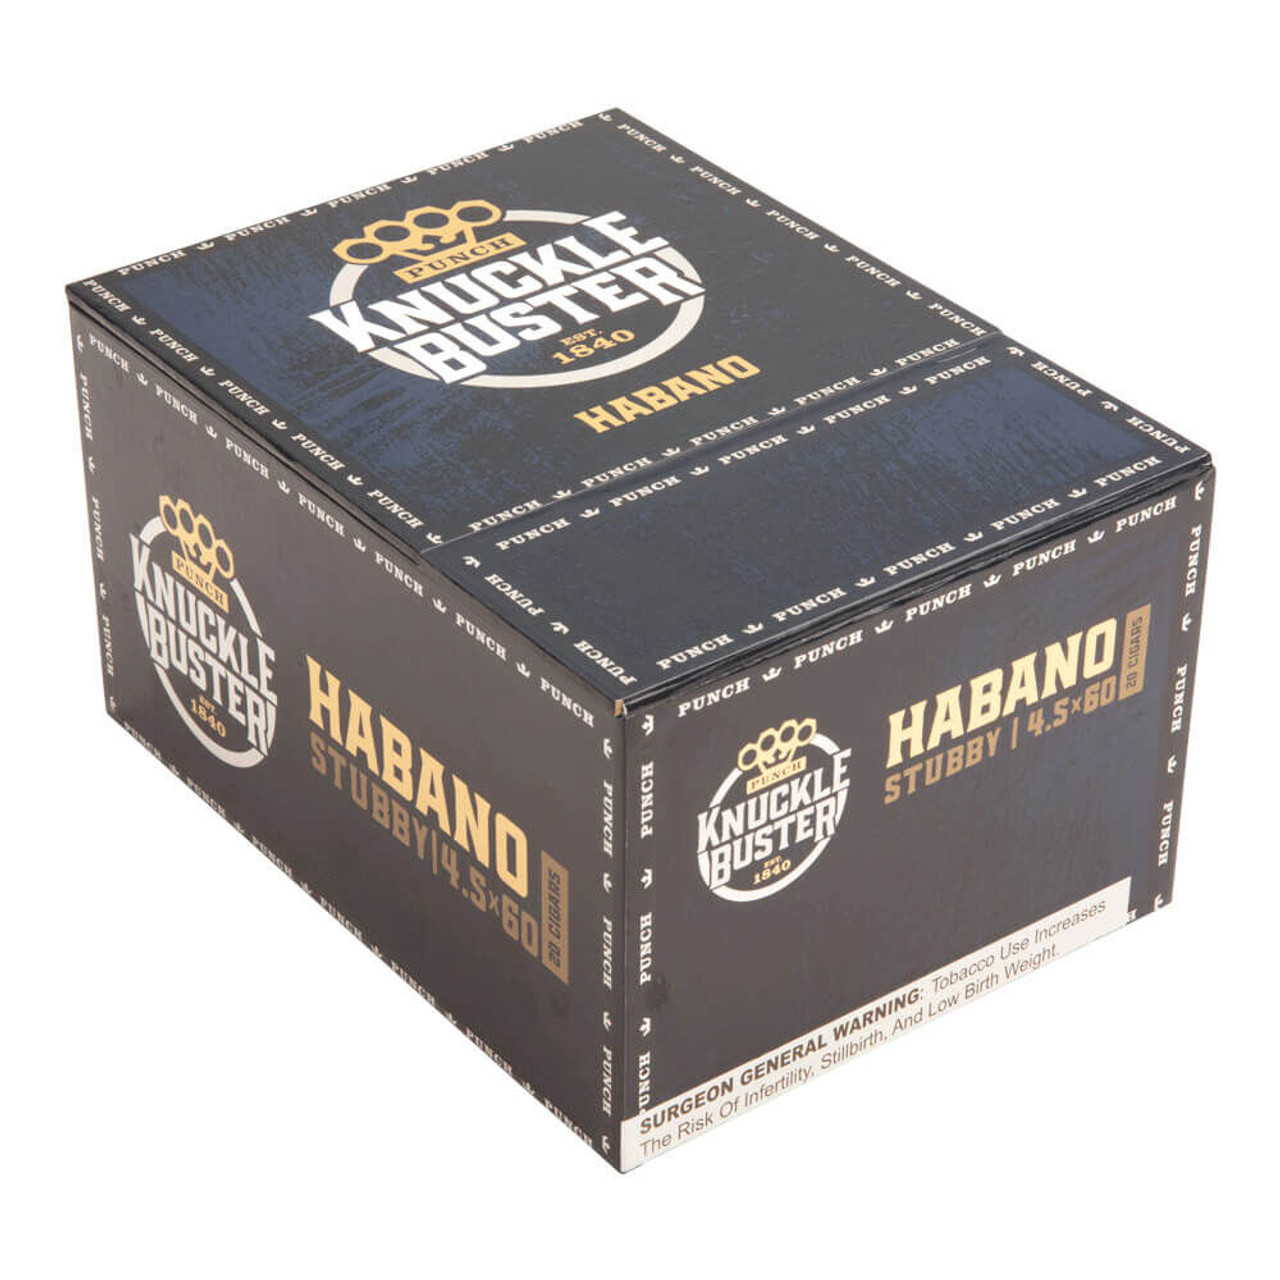 Punch Knuckle Buster Stubby Cigars - 4.5 x 60 (Box of 20) *Box